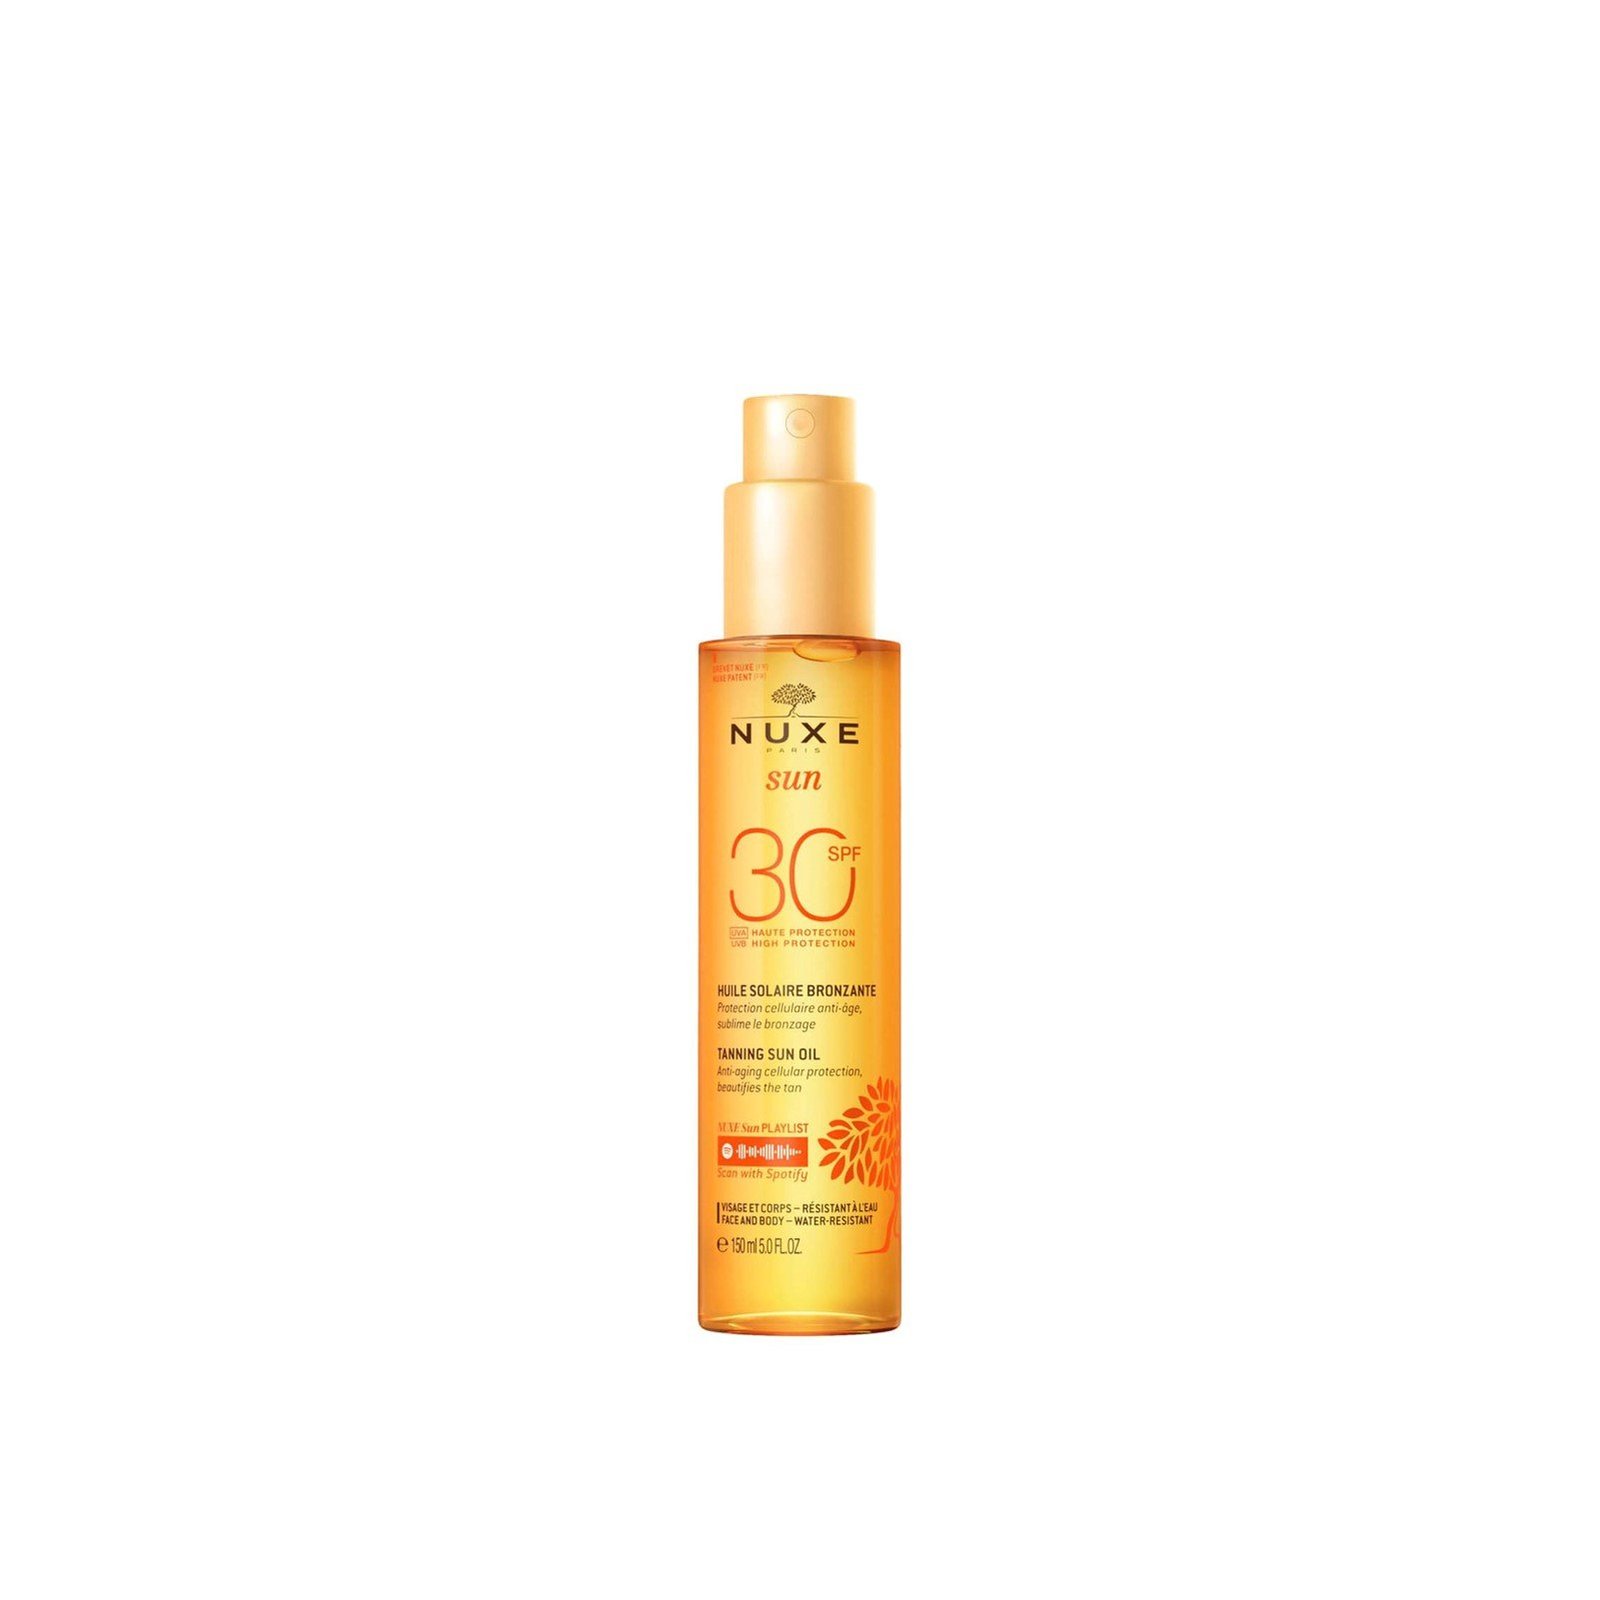 NUXE Sun Tanning Oil High Protection for Face and Body SPF30 150ml (5.07fl oz)